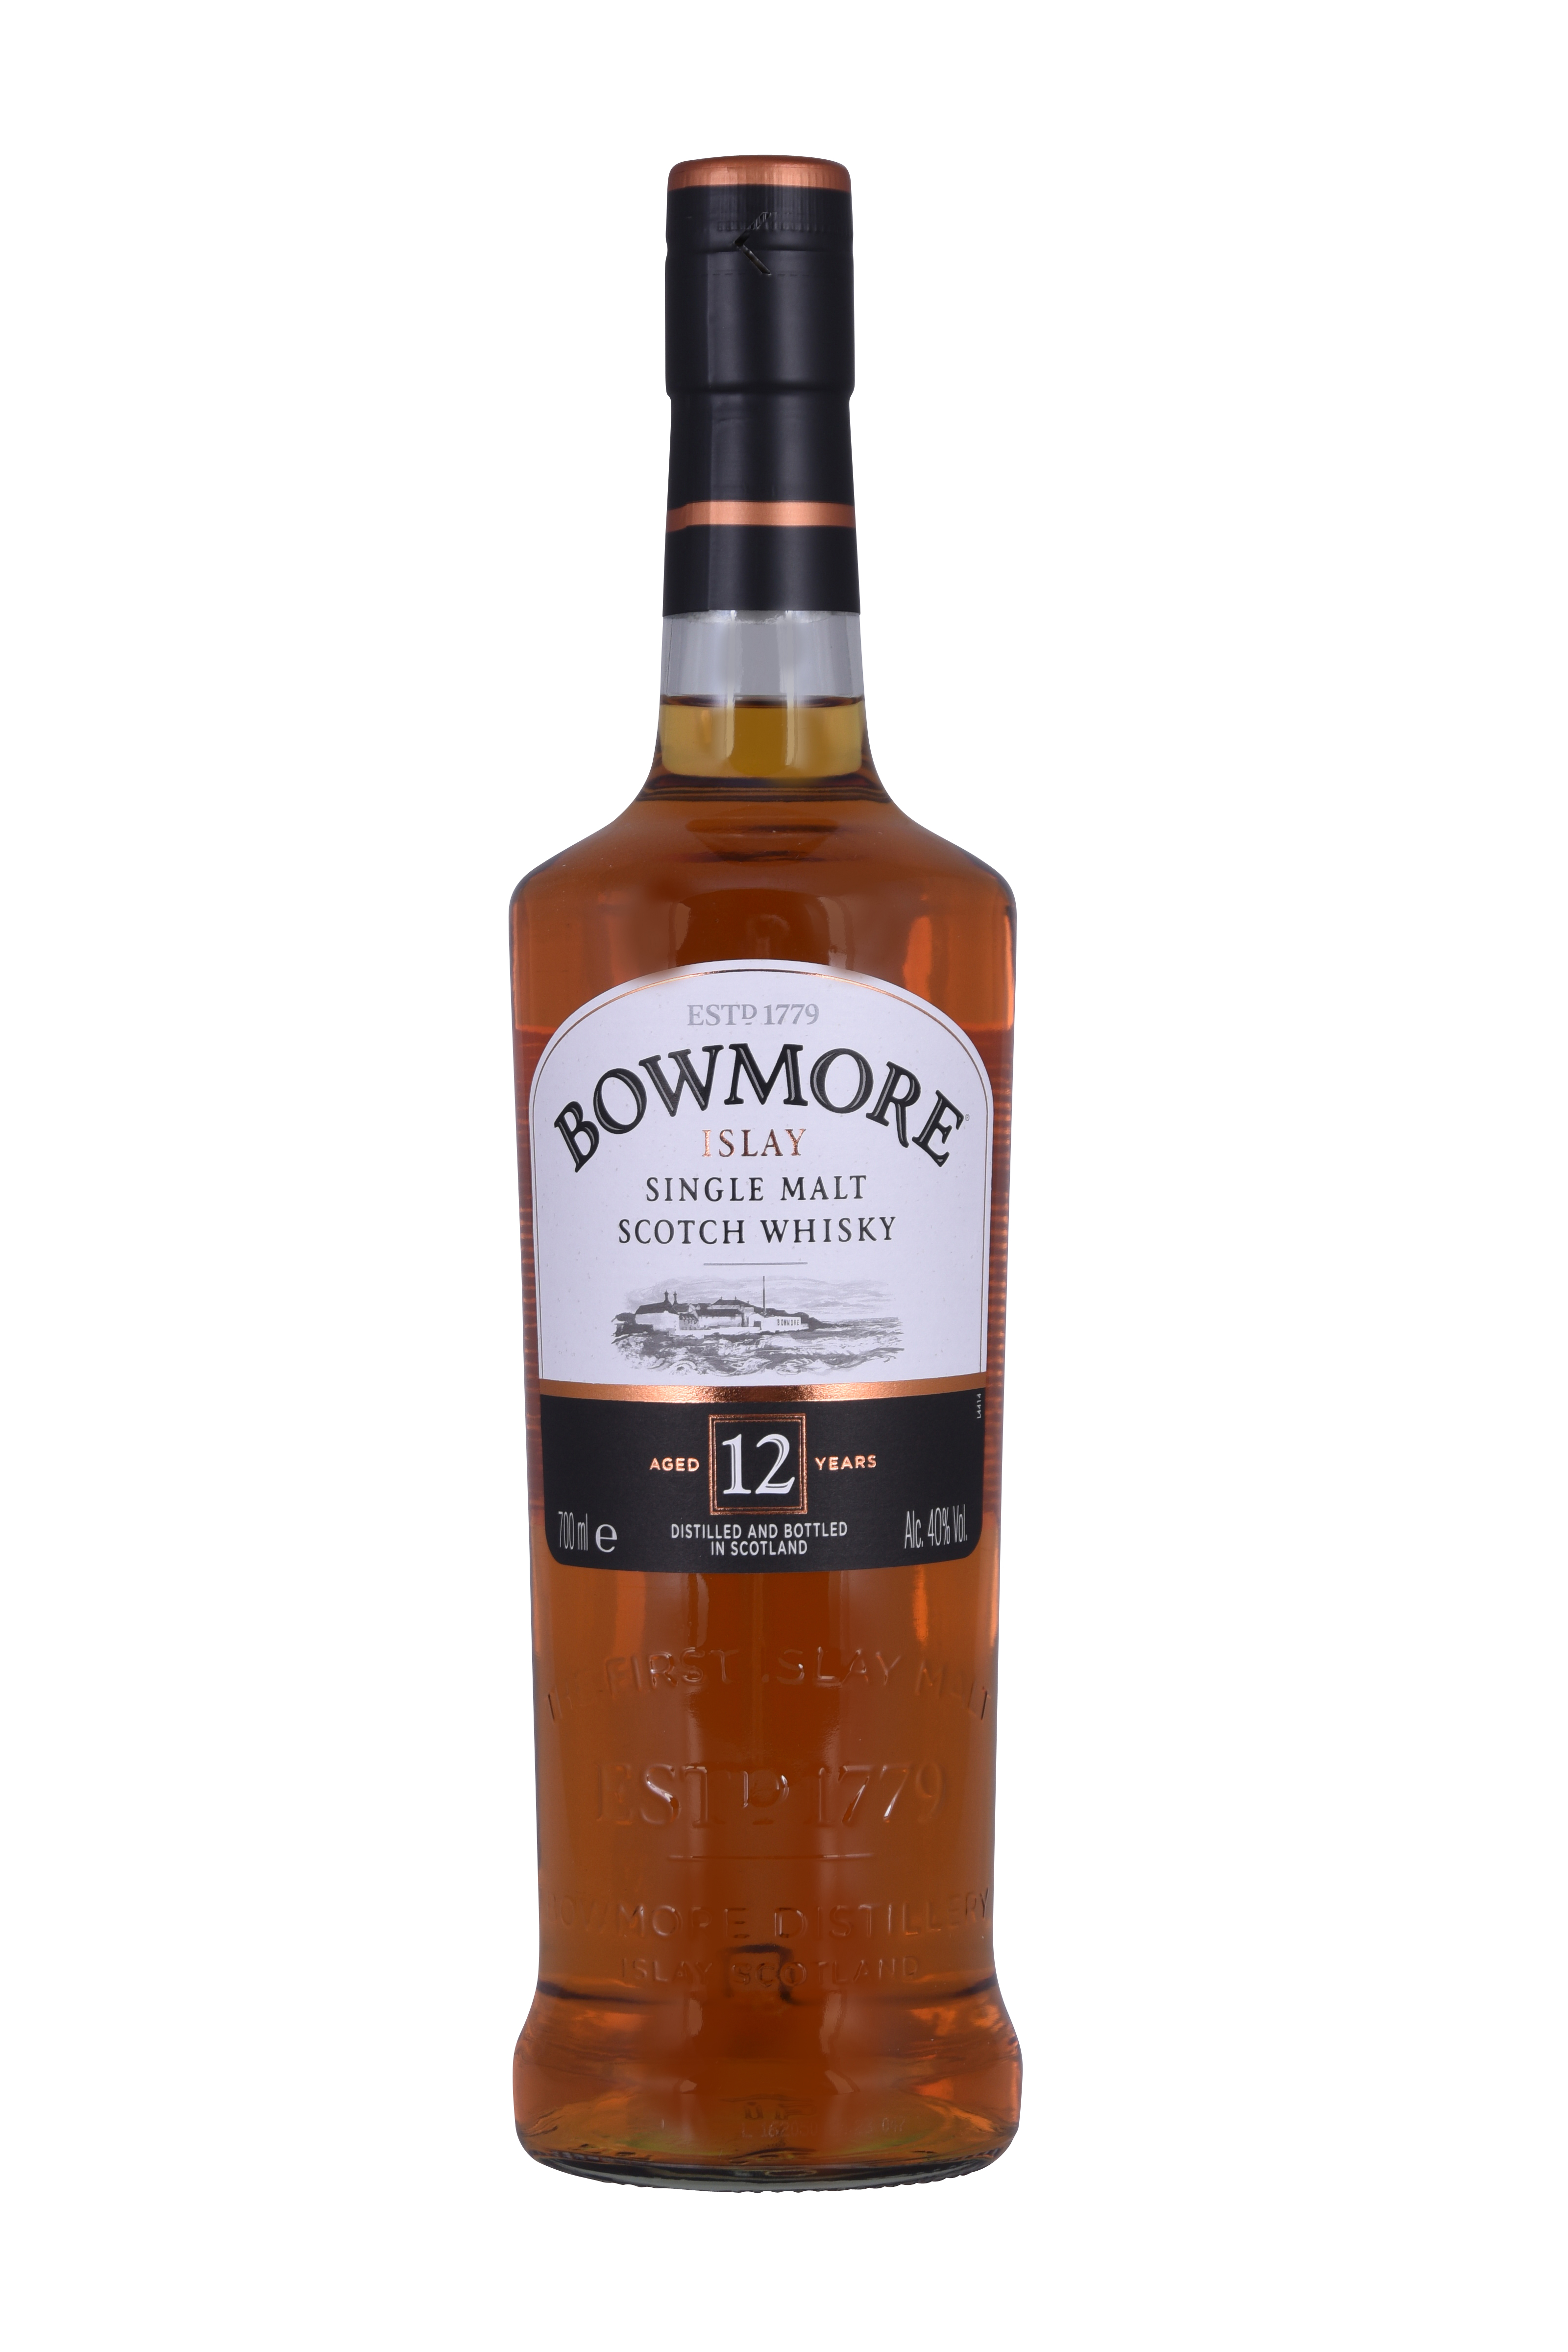 66907 Bowmore 12 years whisky 1x0,70 ltr